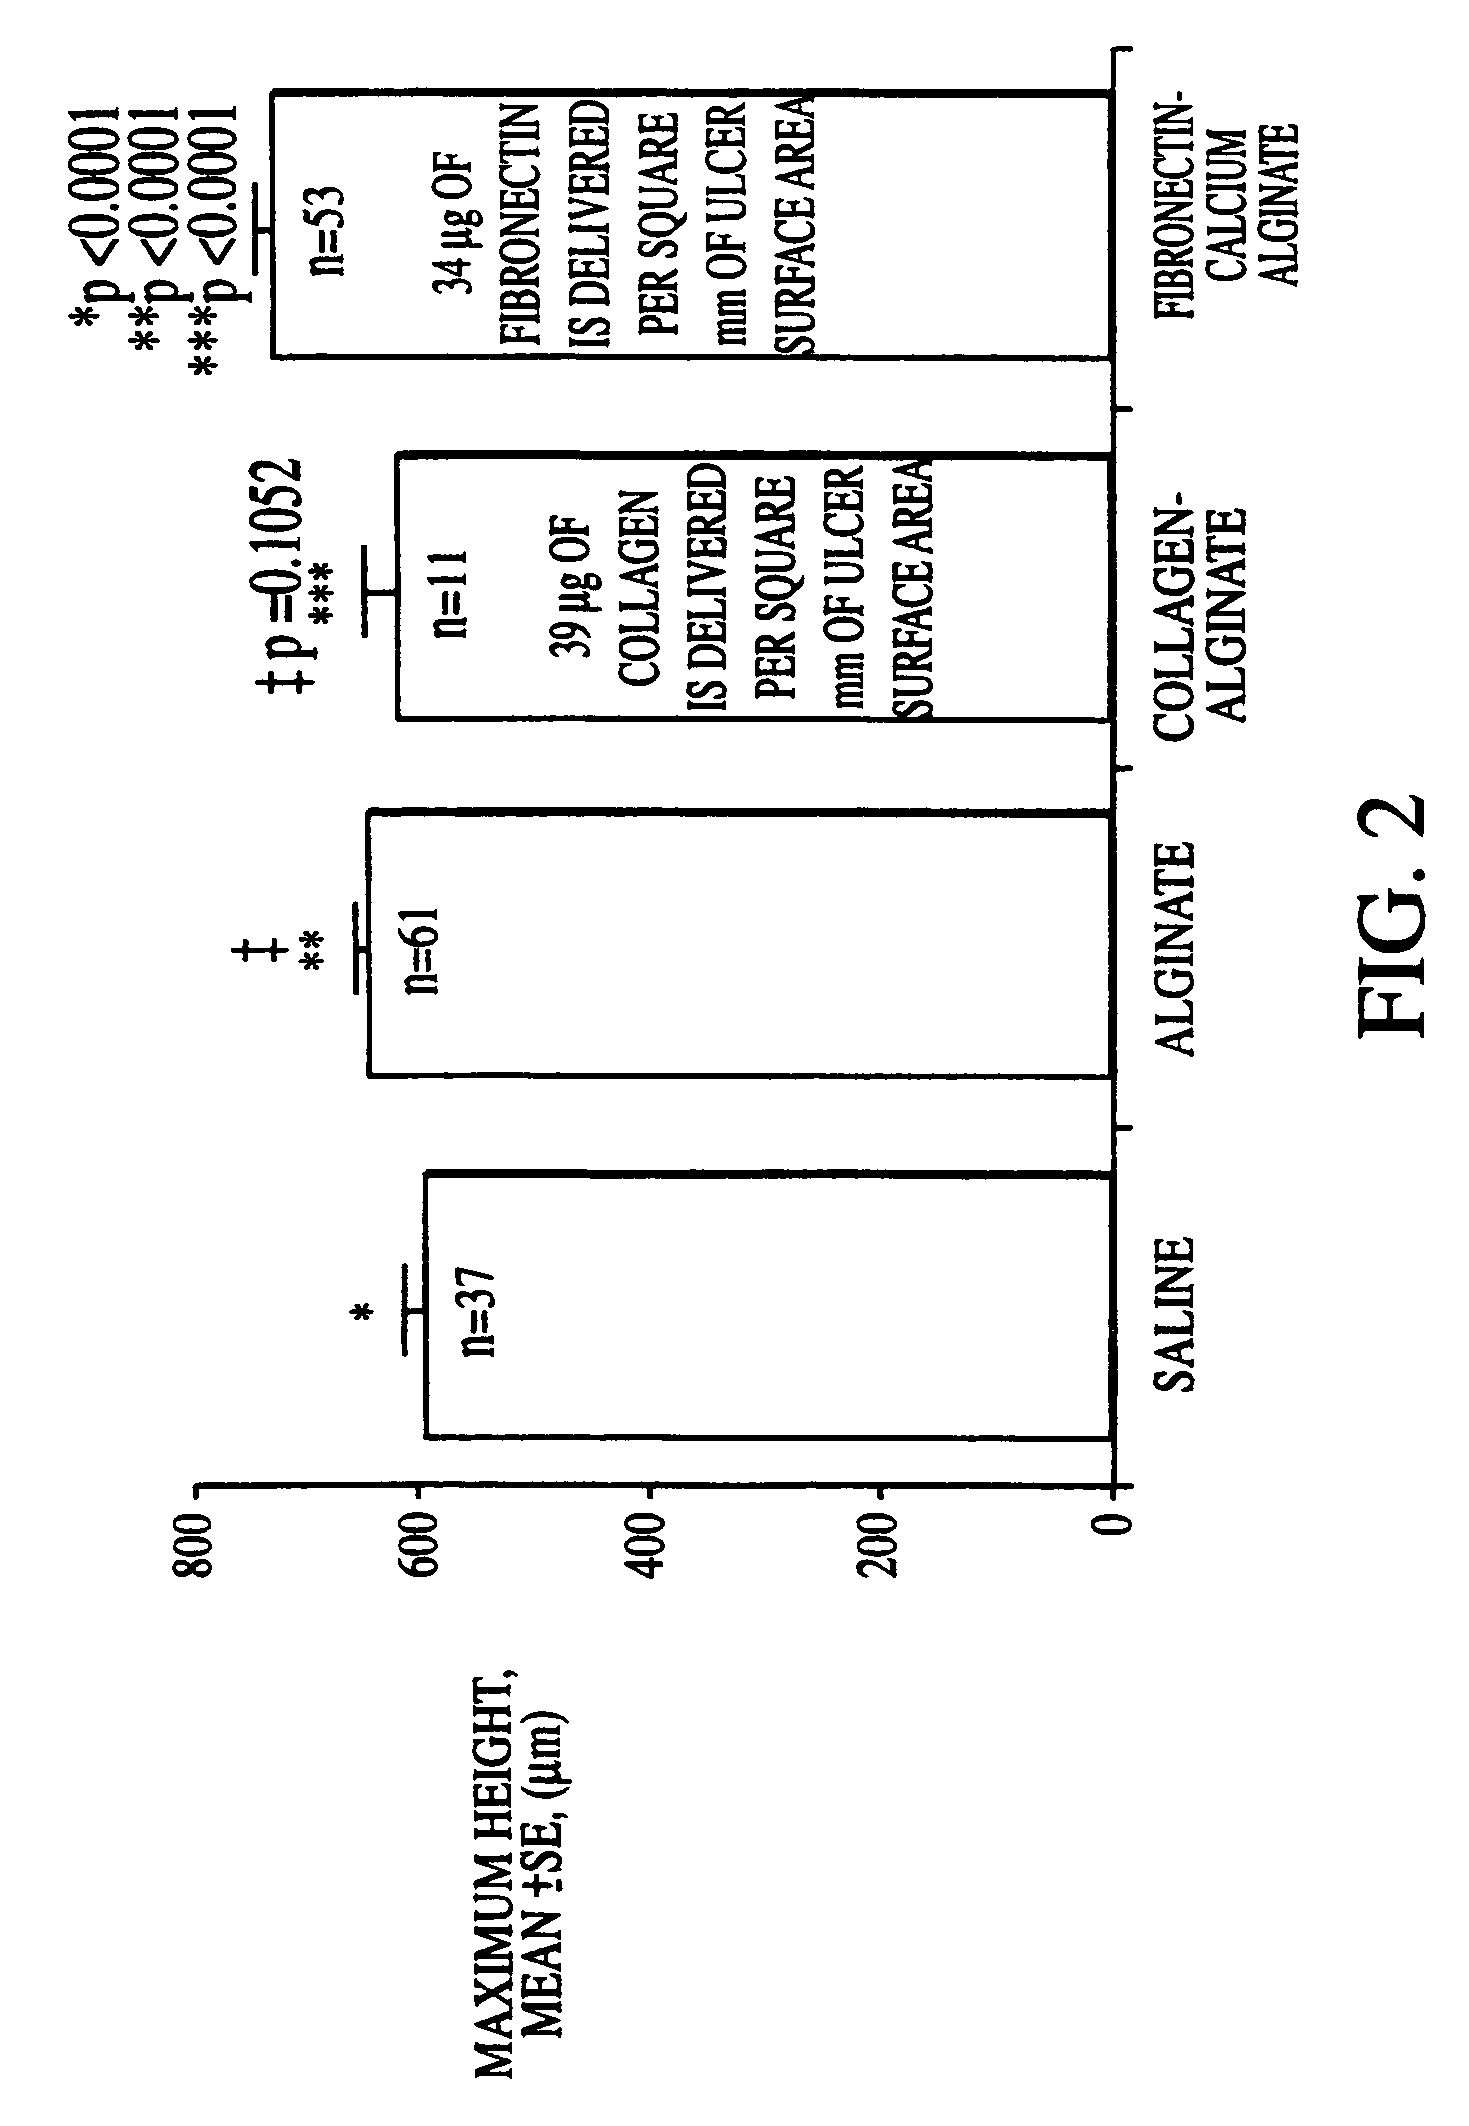 Solid wound healing formulations containing fibronectin